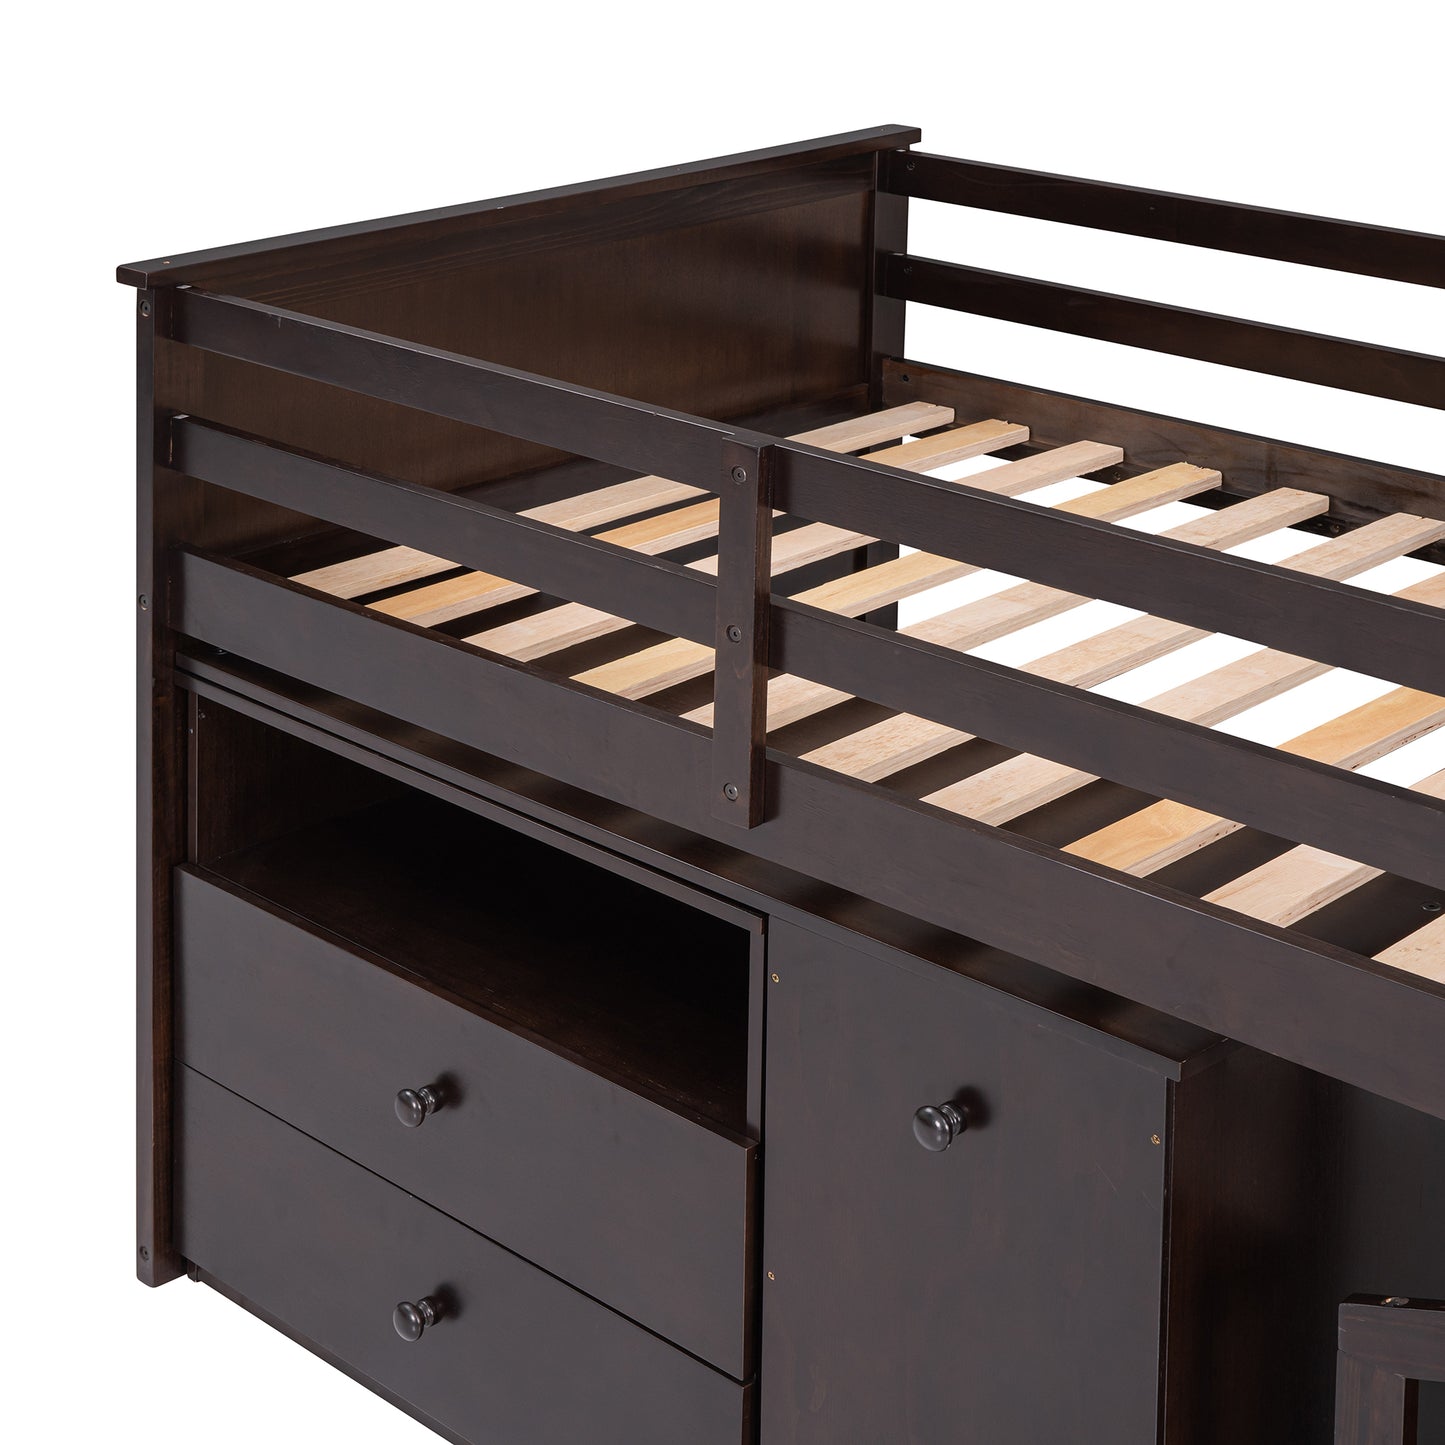 Loft Bed Low Study Twin Size Loft Bed With Storage Steps and Portable,Desk,Espresso